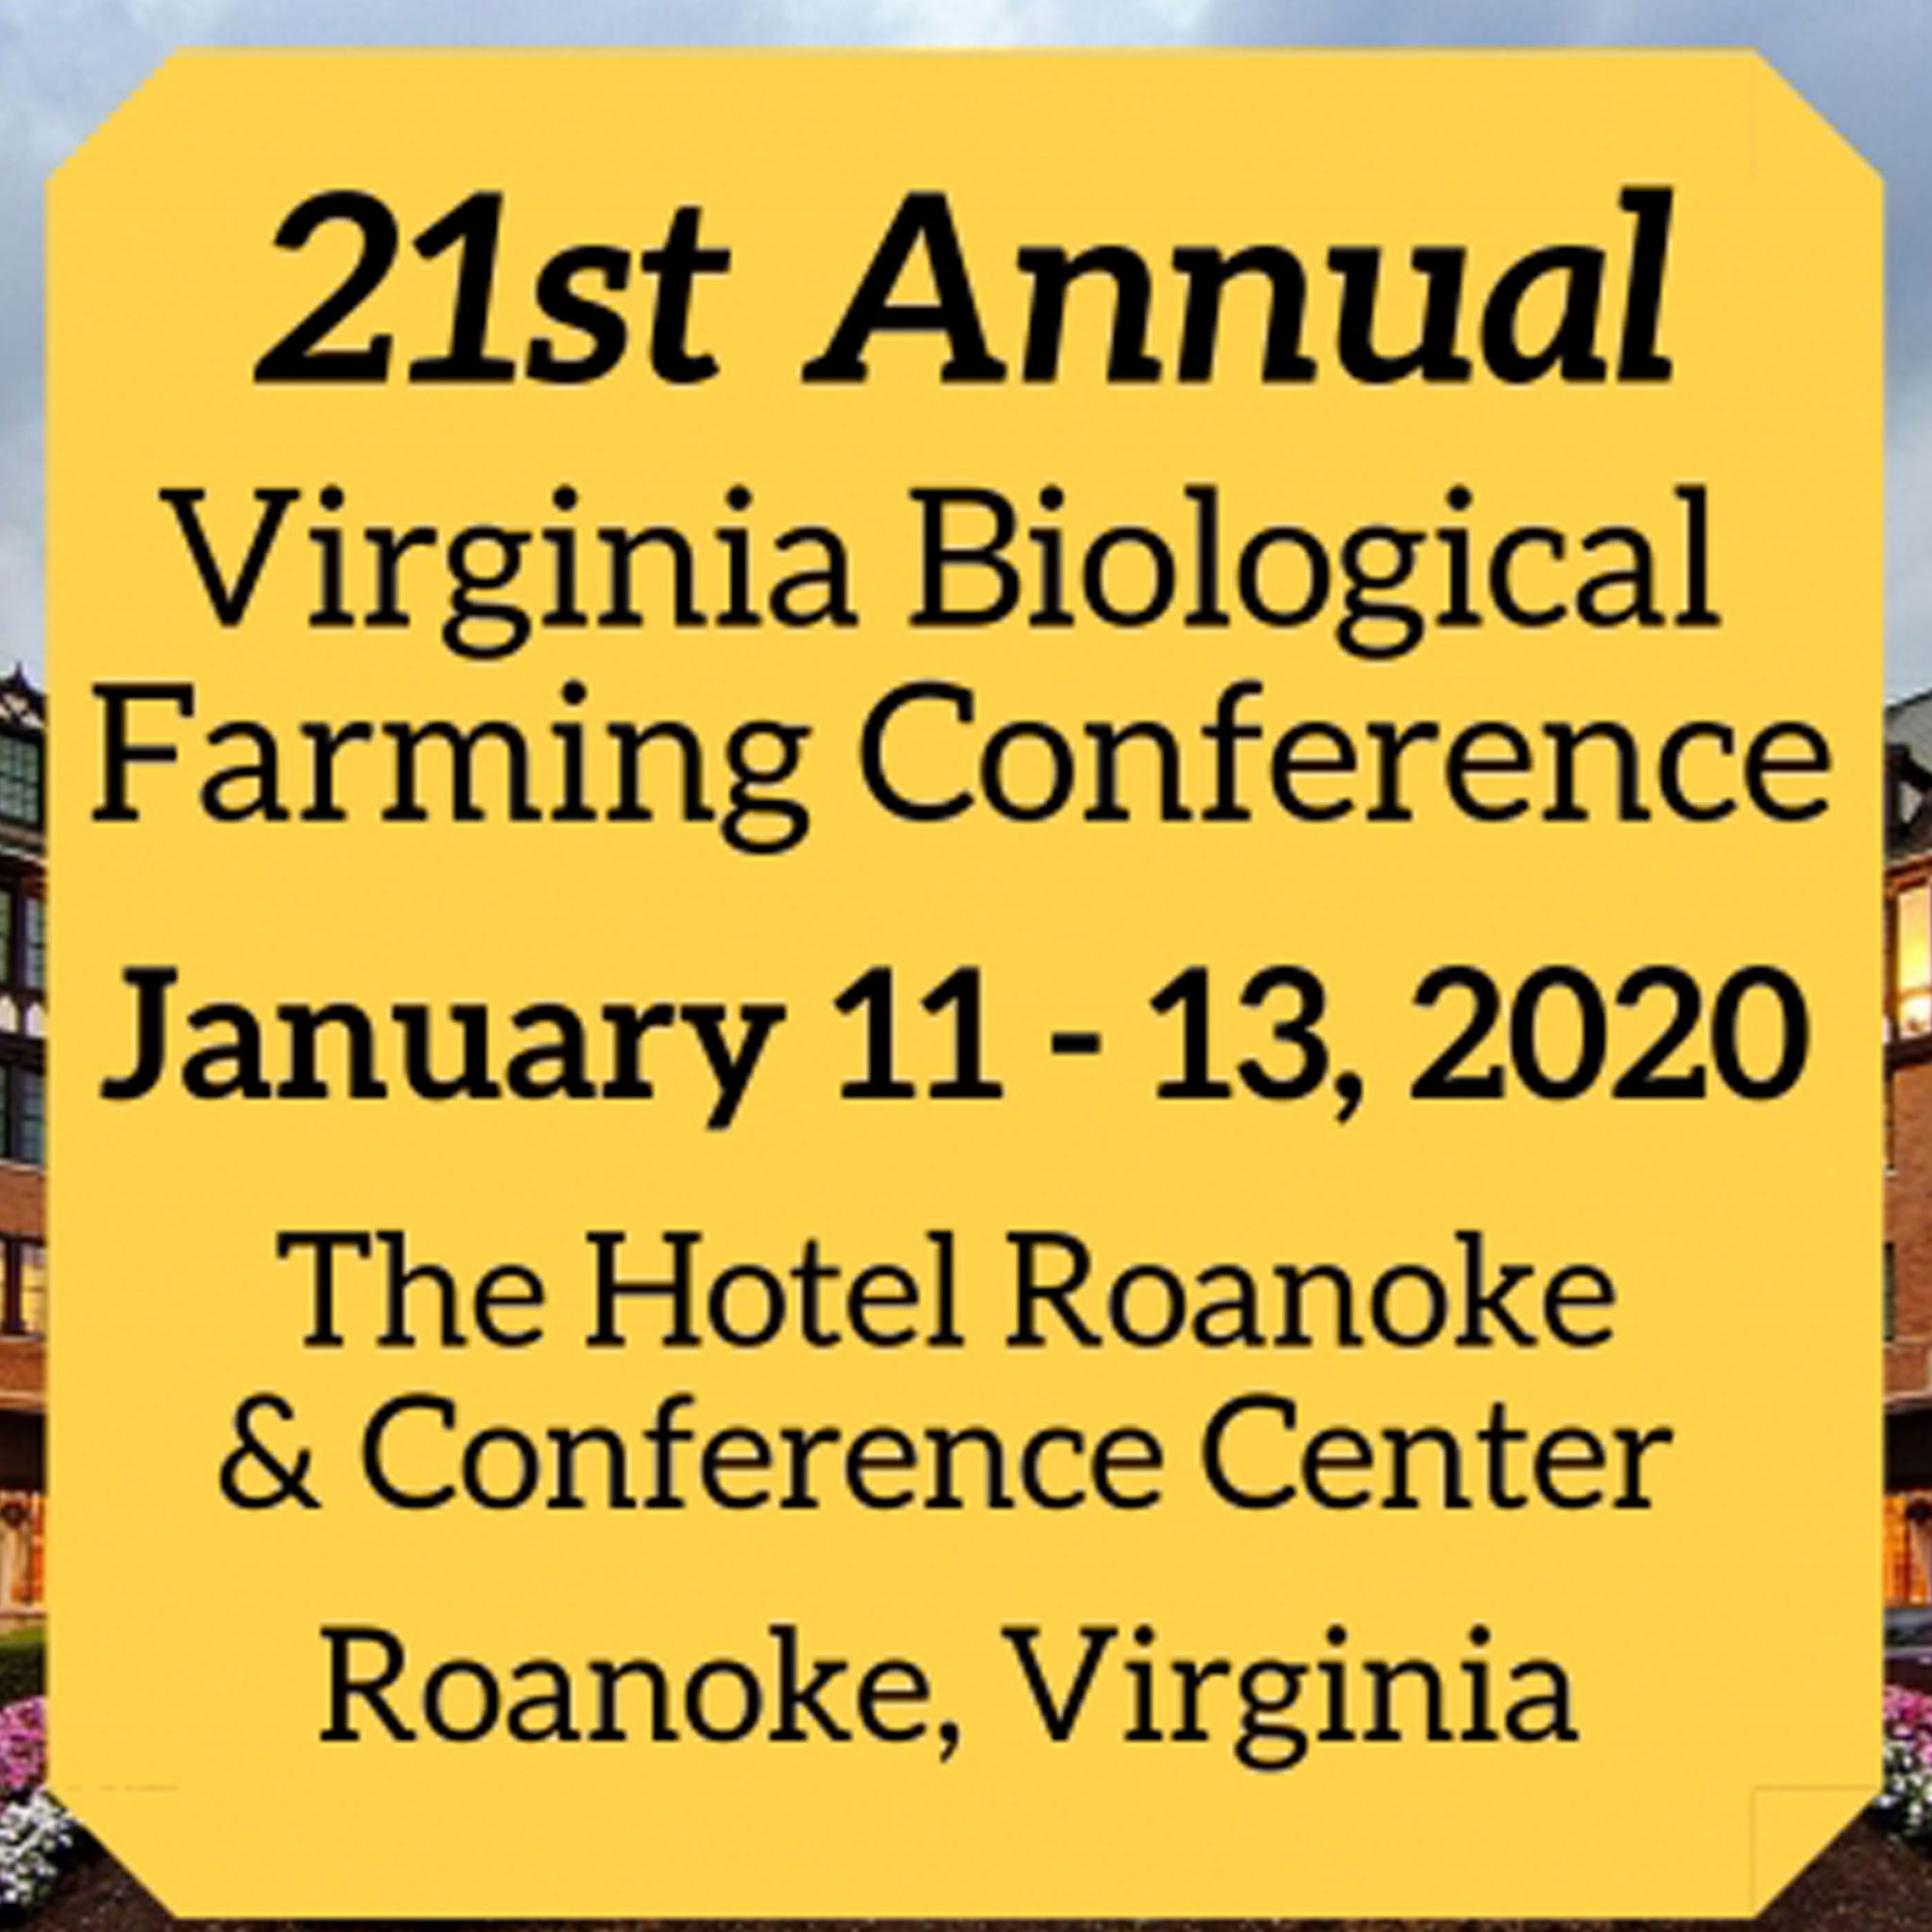 21st Annual Virginia Biological Farming Conference